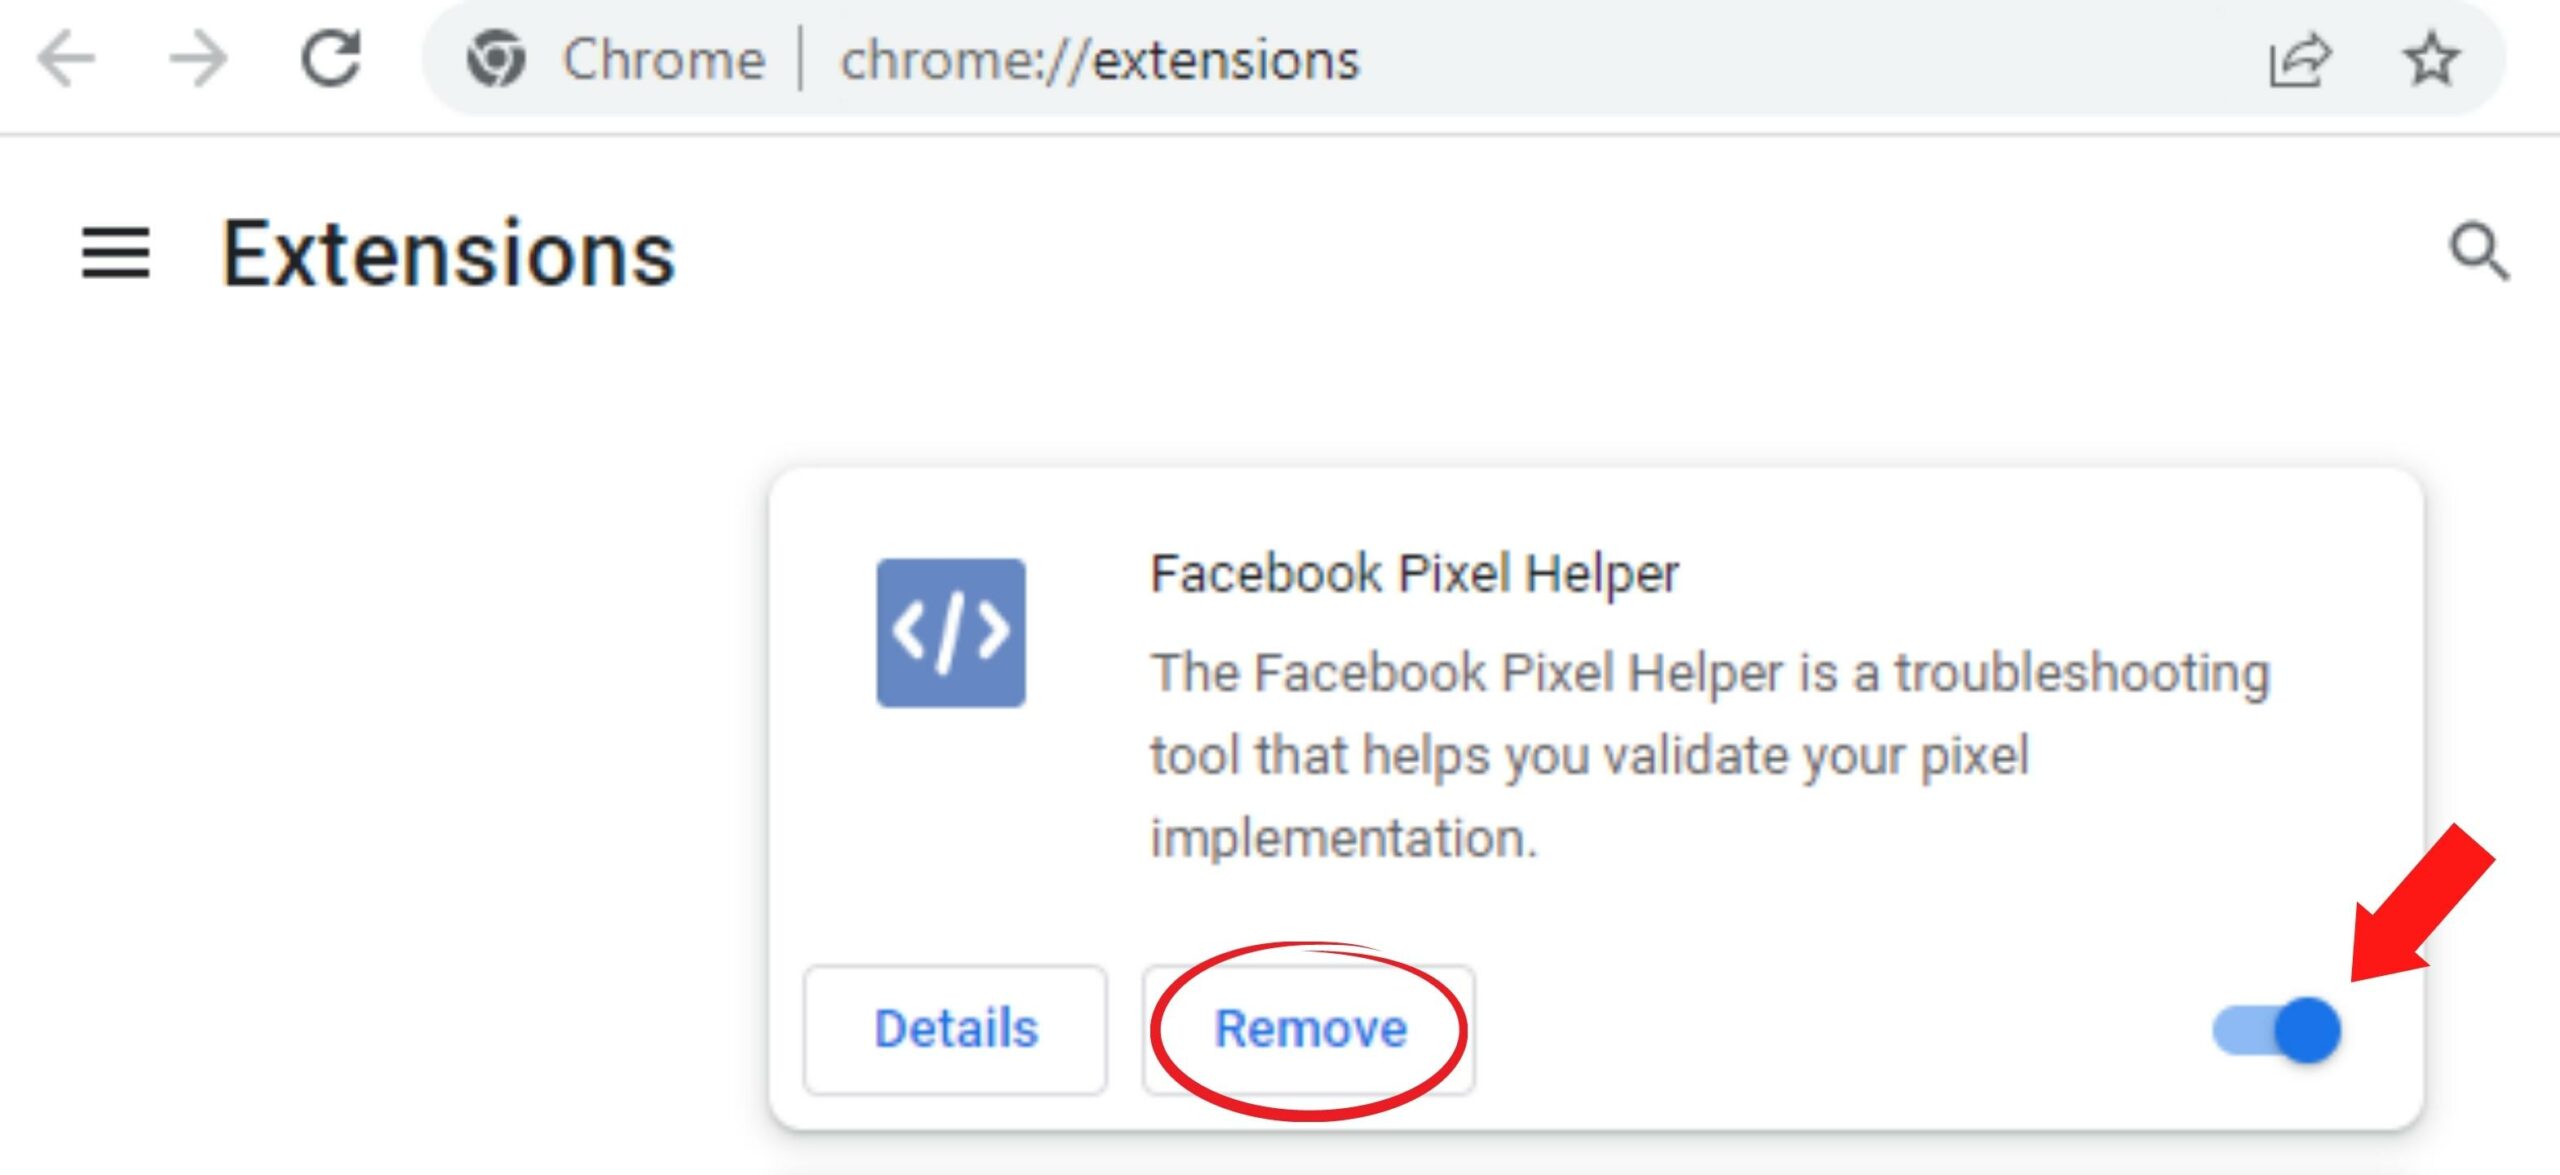 You can uninstall the Facebook Pixel Helper completely by clicking “Remove”